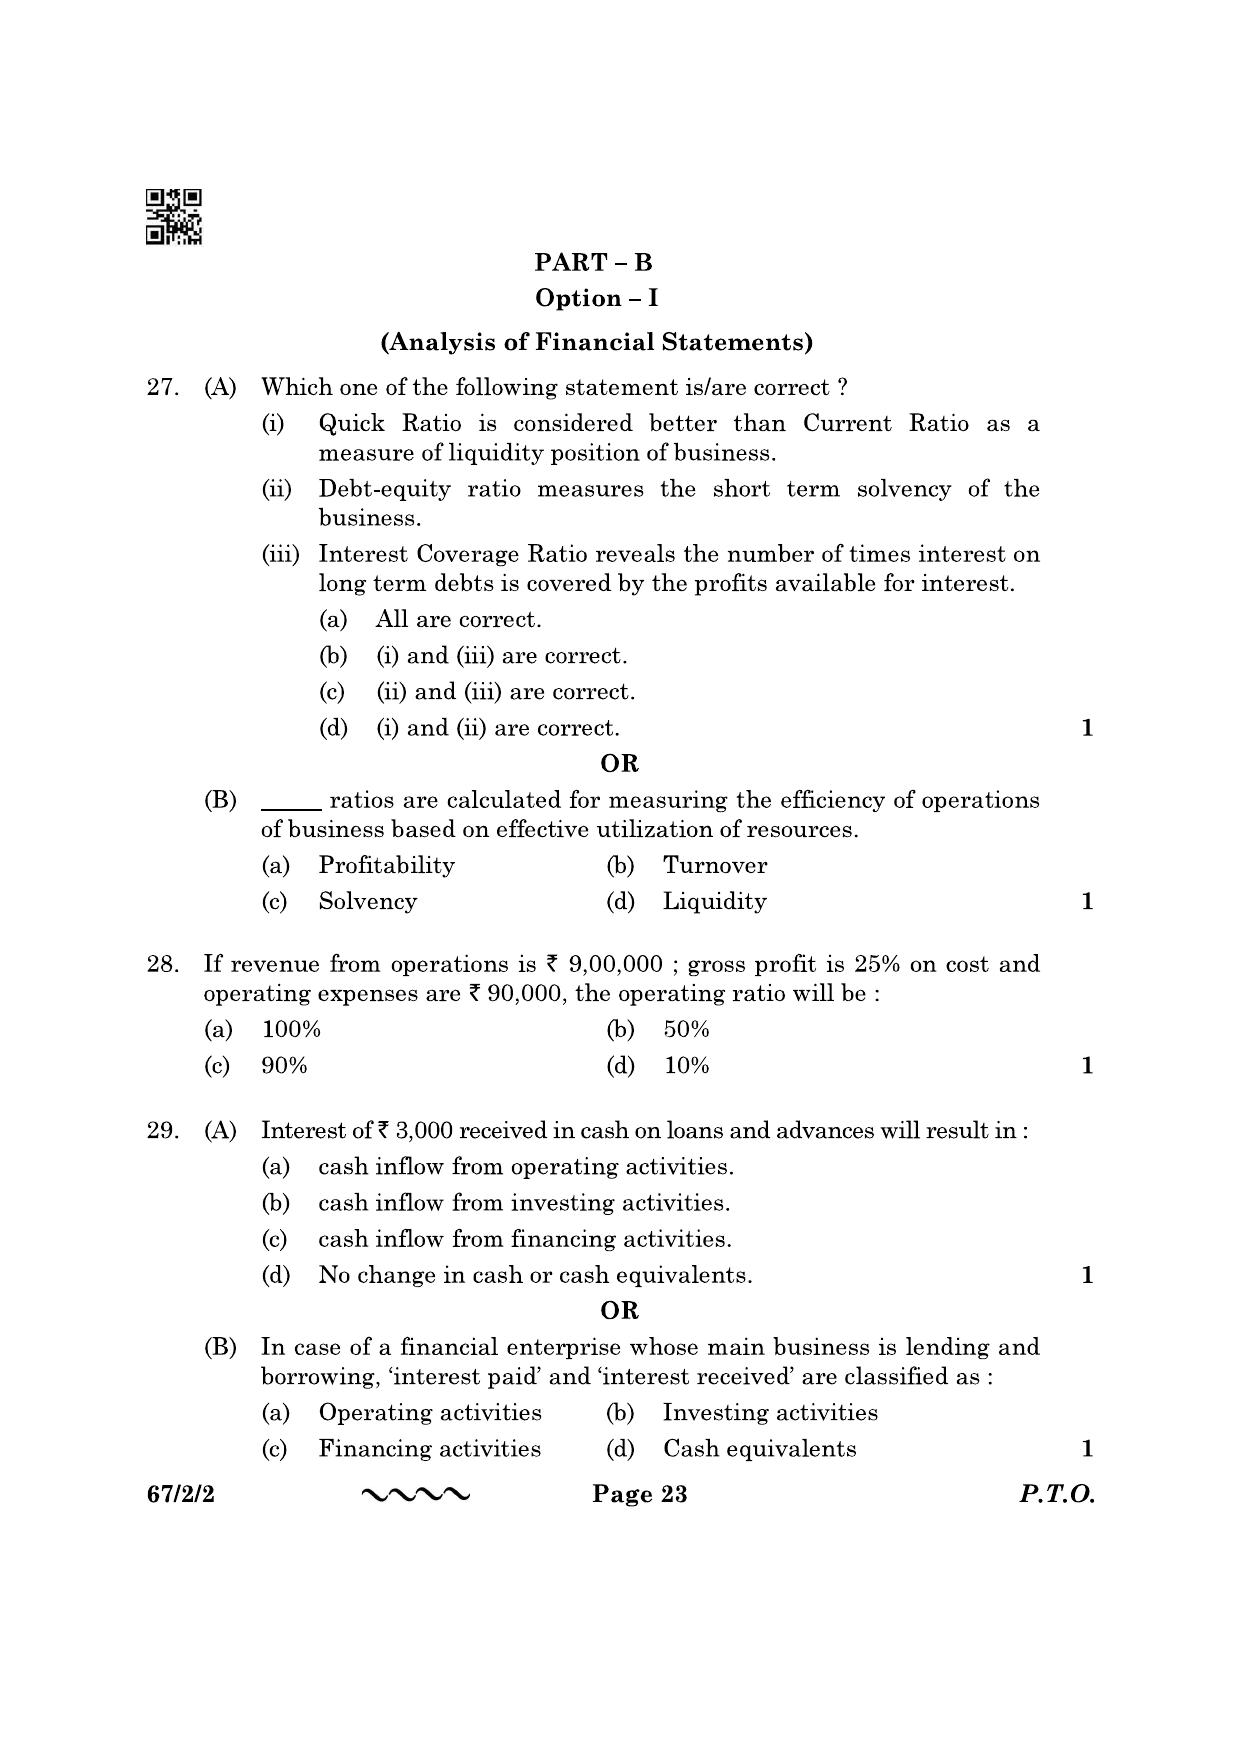 CBSE Class 12 67-2-2 Accountancy 2023 Question Paper - Page 23